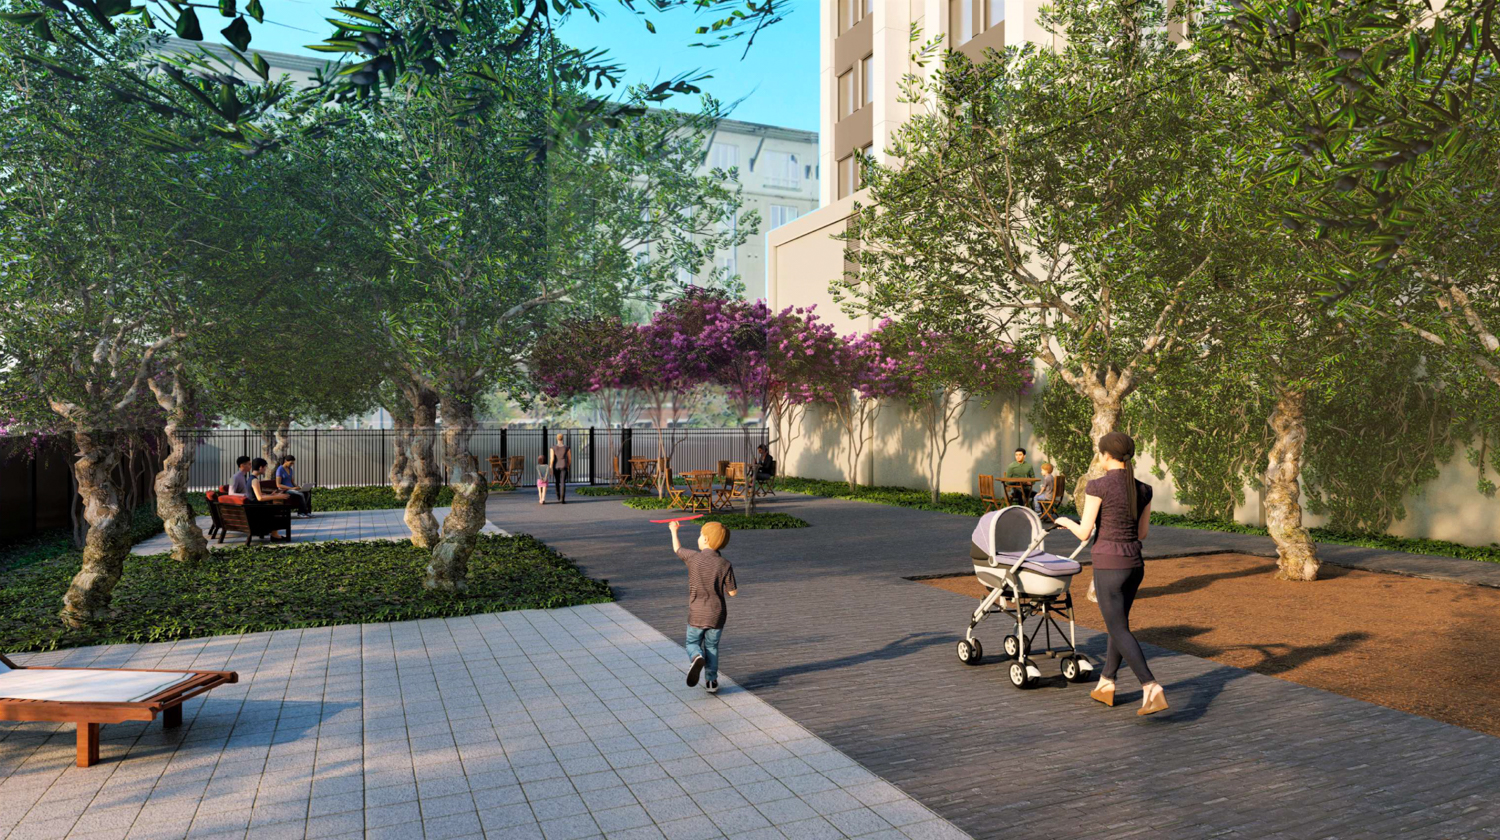 Proposed garden to replace the parking garage in the Marriott at 1431 Jefferson Street, design by Stanton Architecture